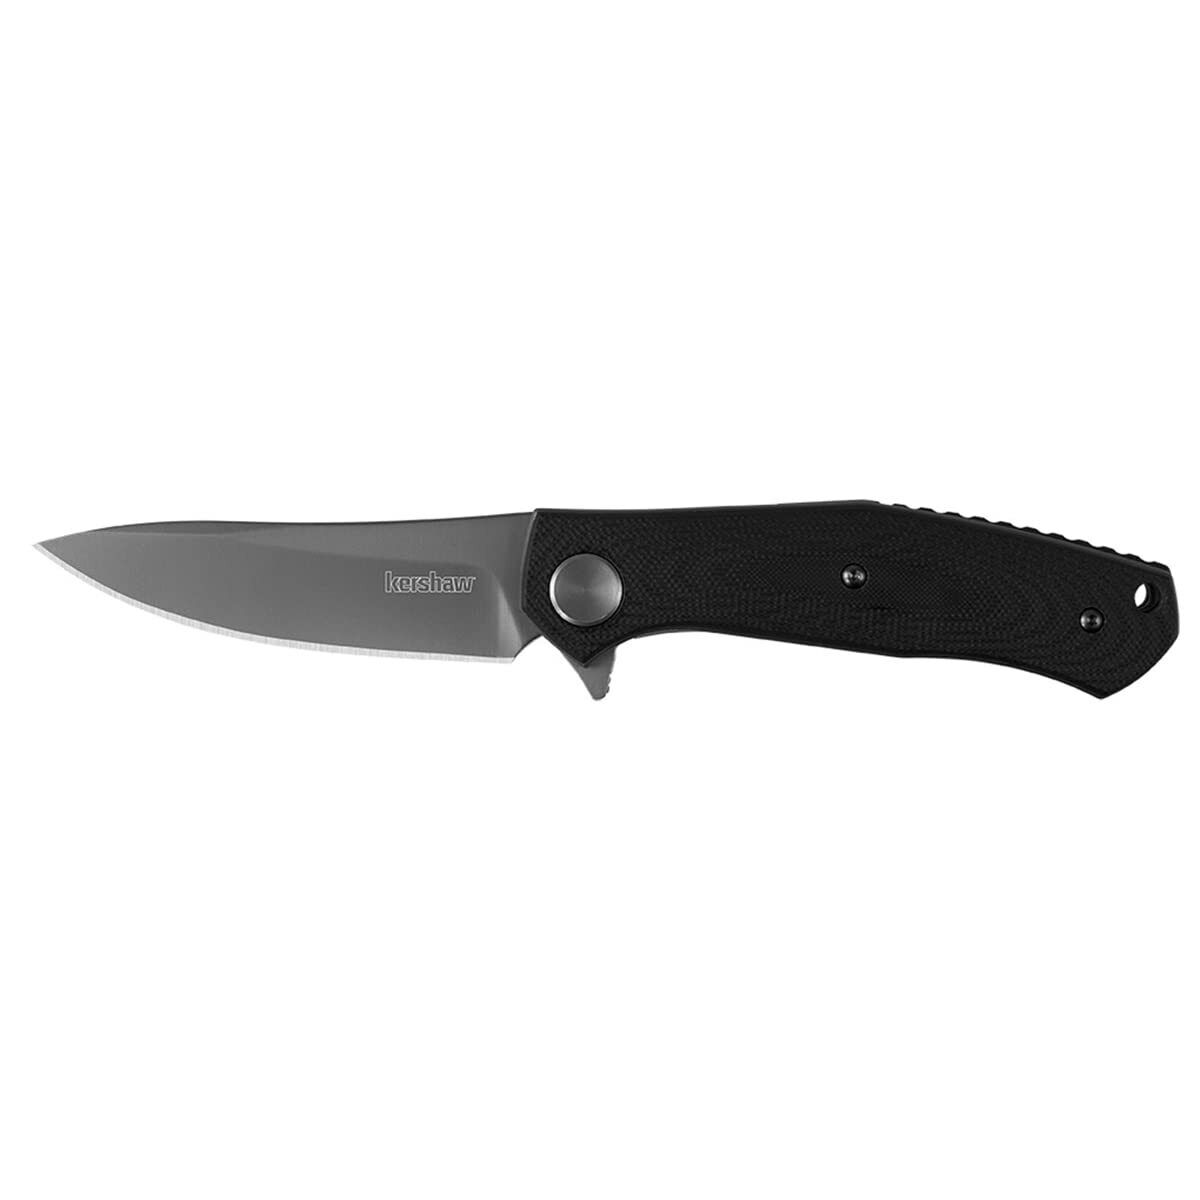 Kershaw 4020X Concierge Folding Knife-Clam Pack, Gray 3.25\